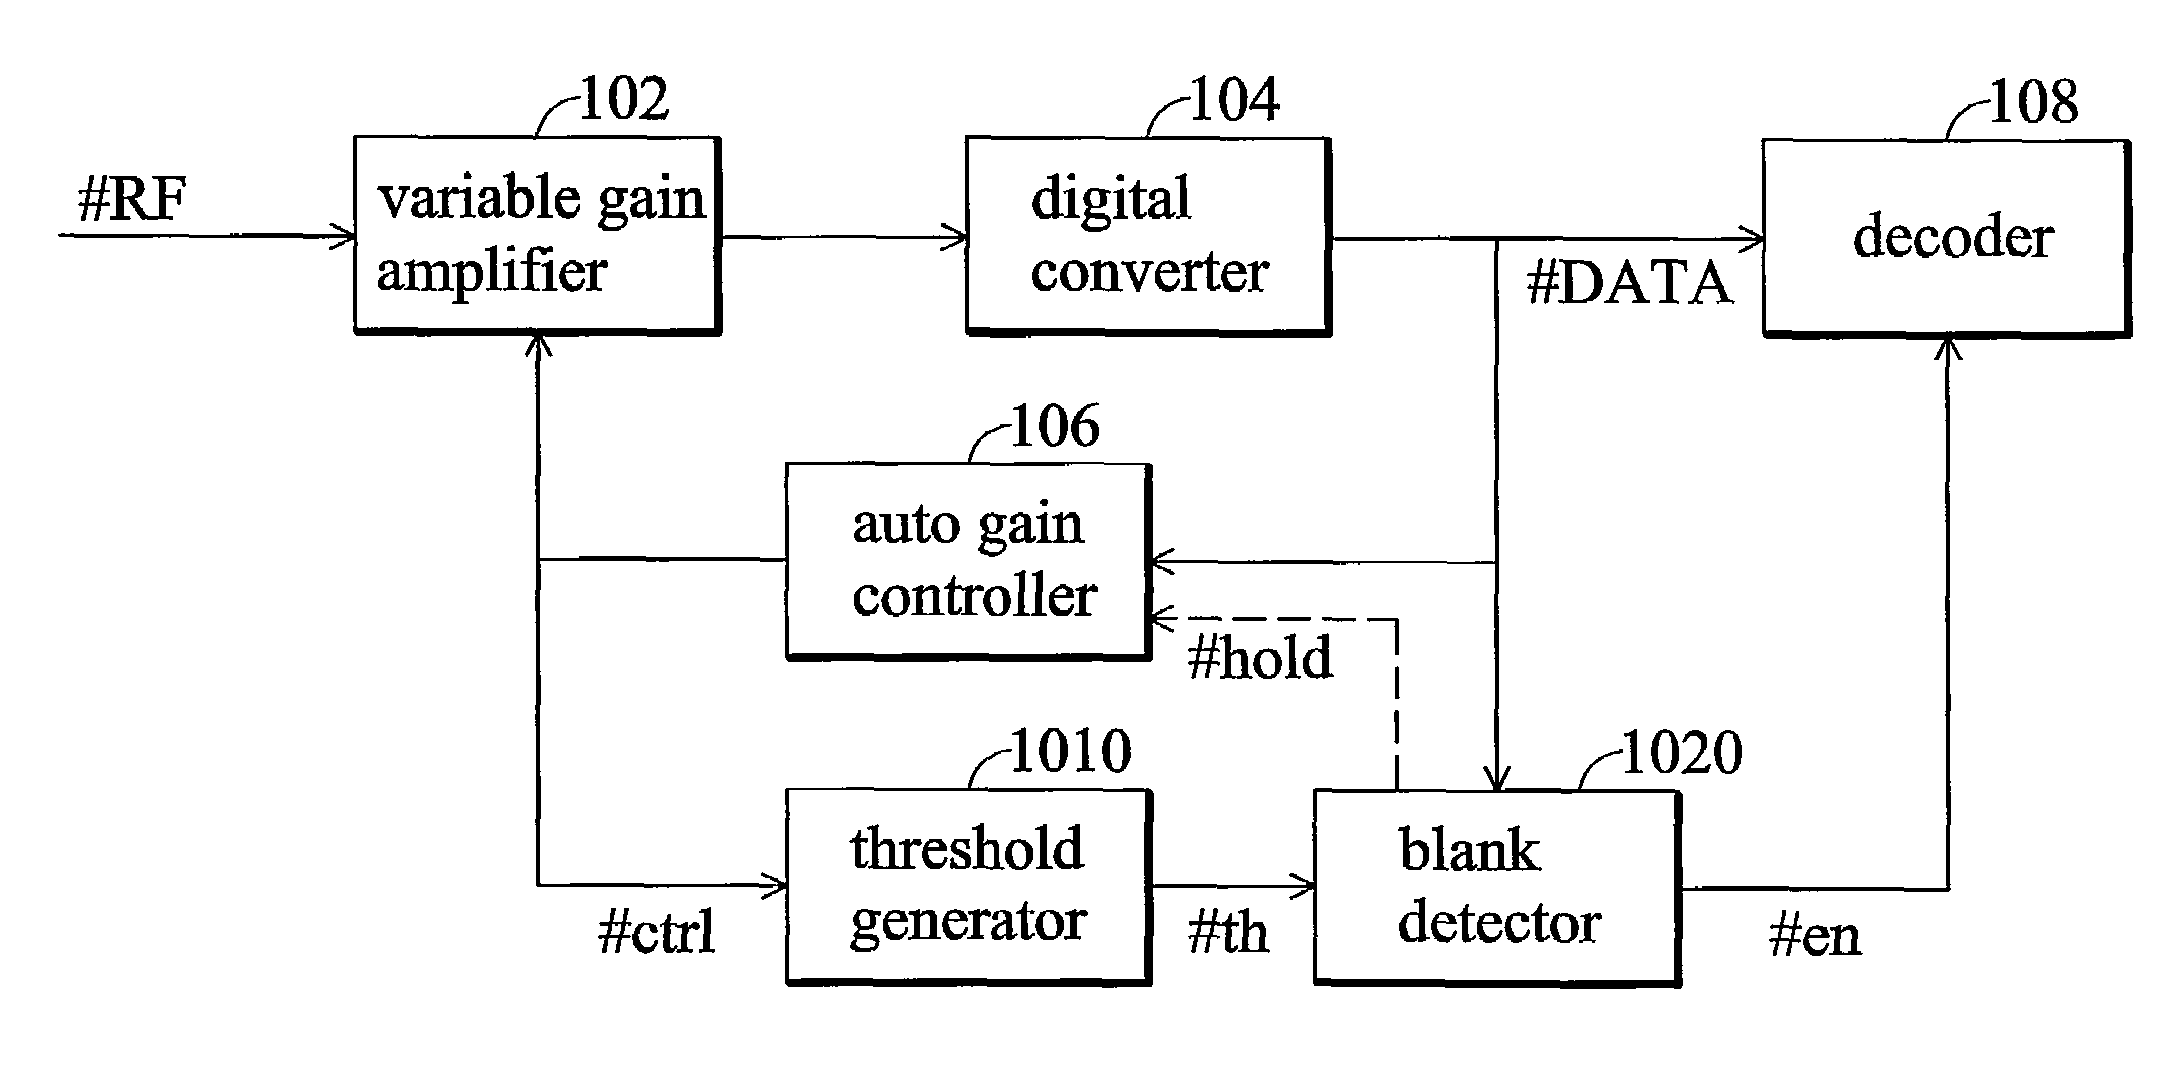 Apparatus and methods for light spot servo signal detection